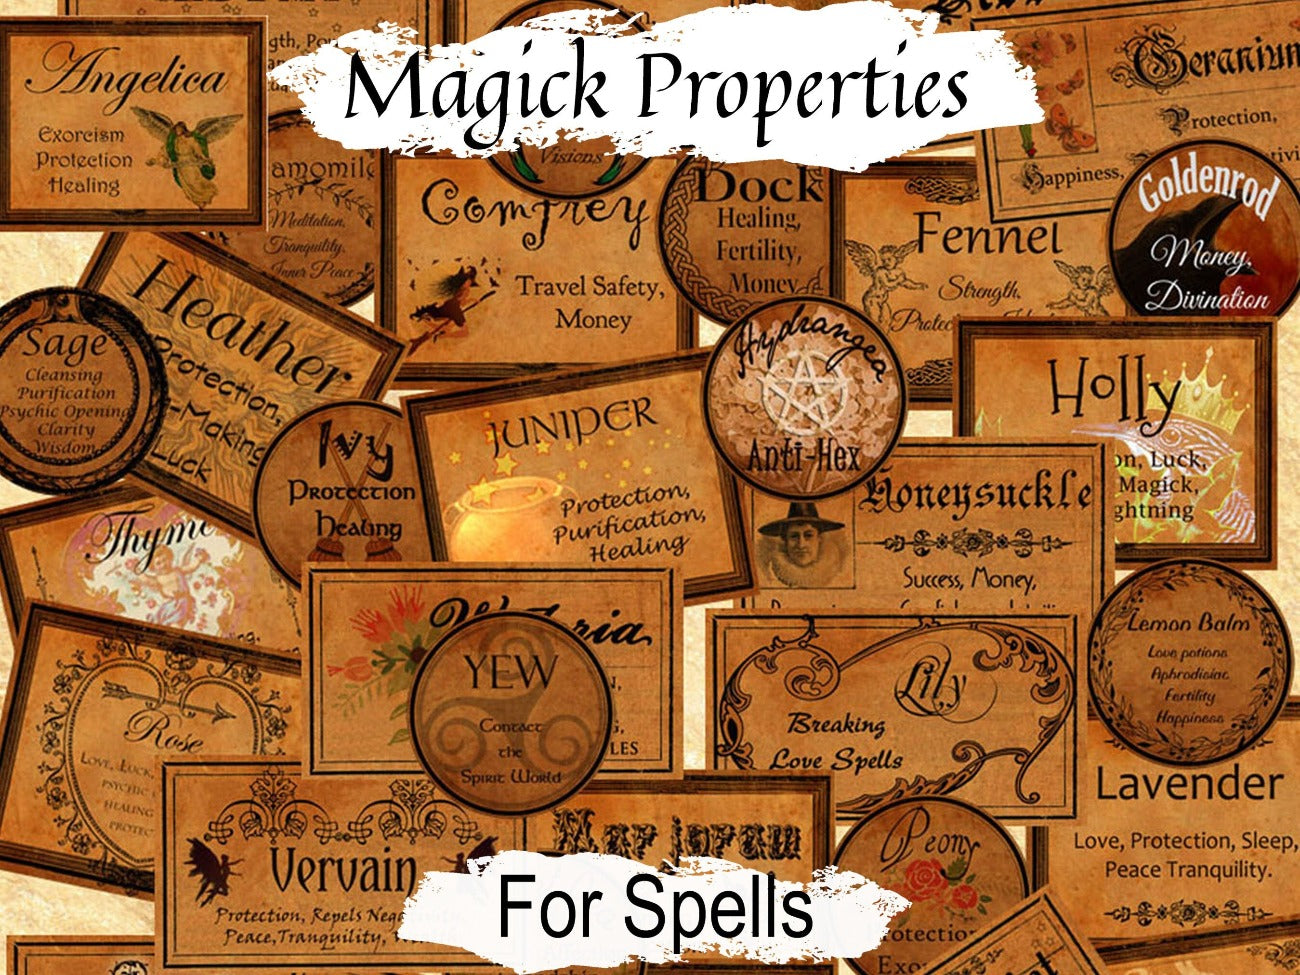 70 WITCHCRAFT LABELS, 2 sizes Large & Small, Wicca Witch Herbs and their Magickal Uses, Apothecary Herb Labels, Potion Spell Spice Labels - Morgana Magick Spell